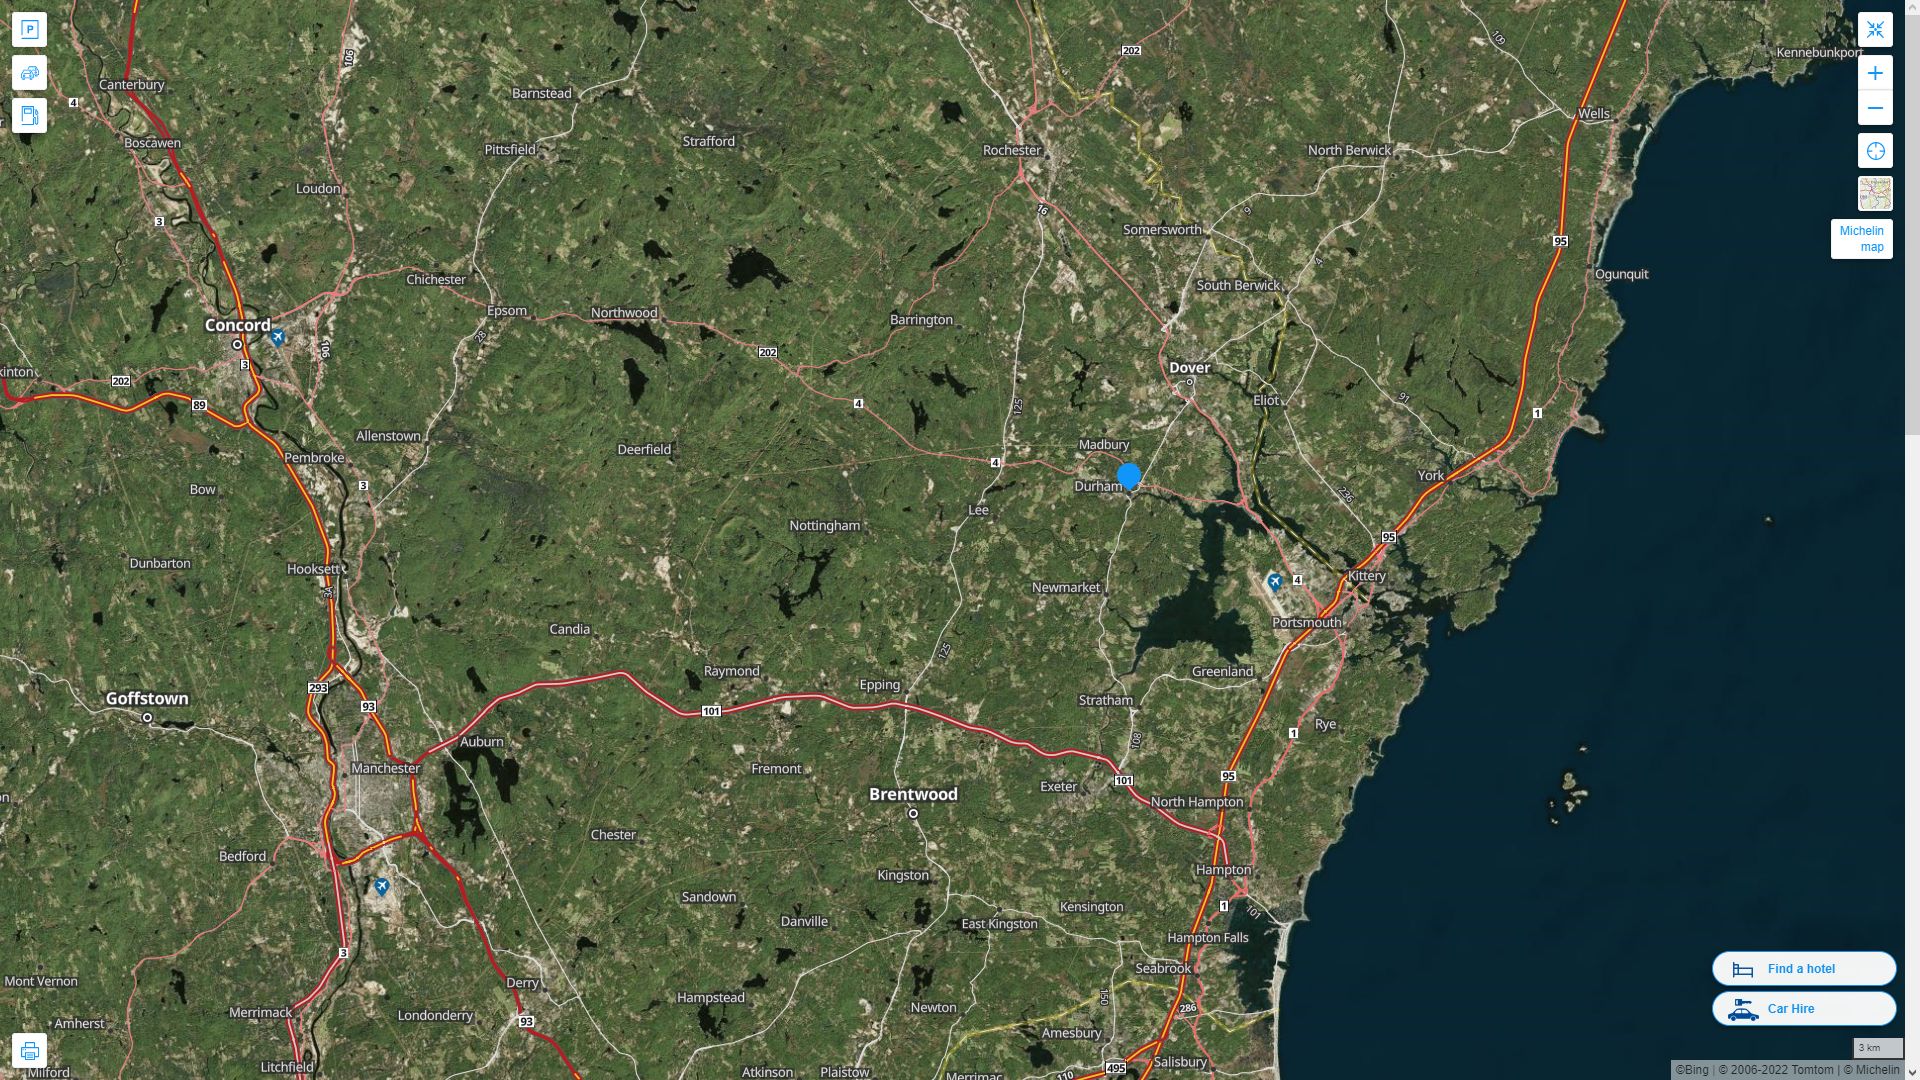 Durham New Hampshire Highway and Road Map with Satellite View